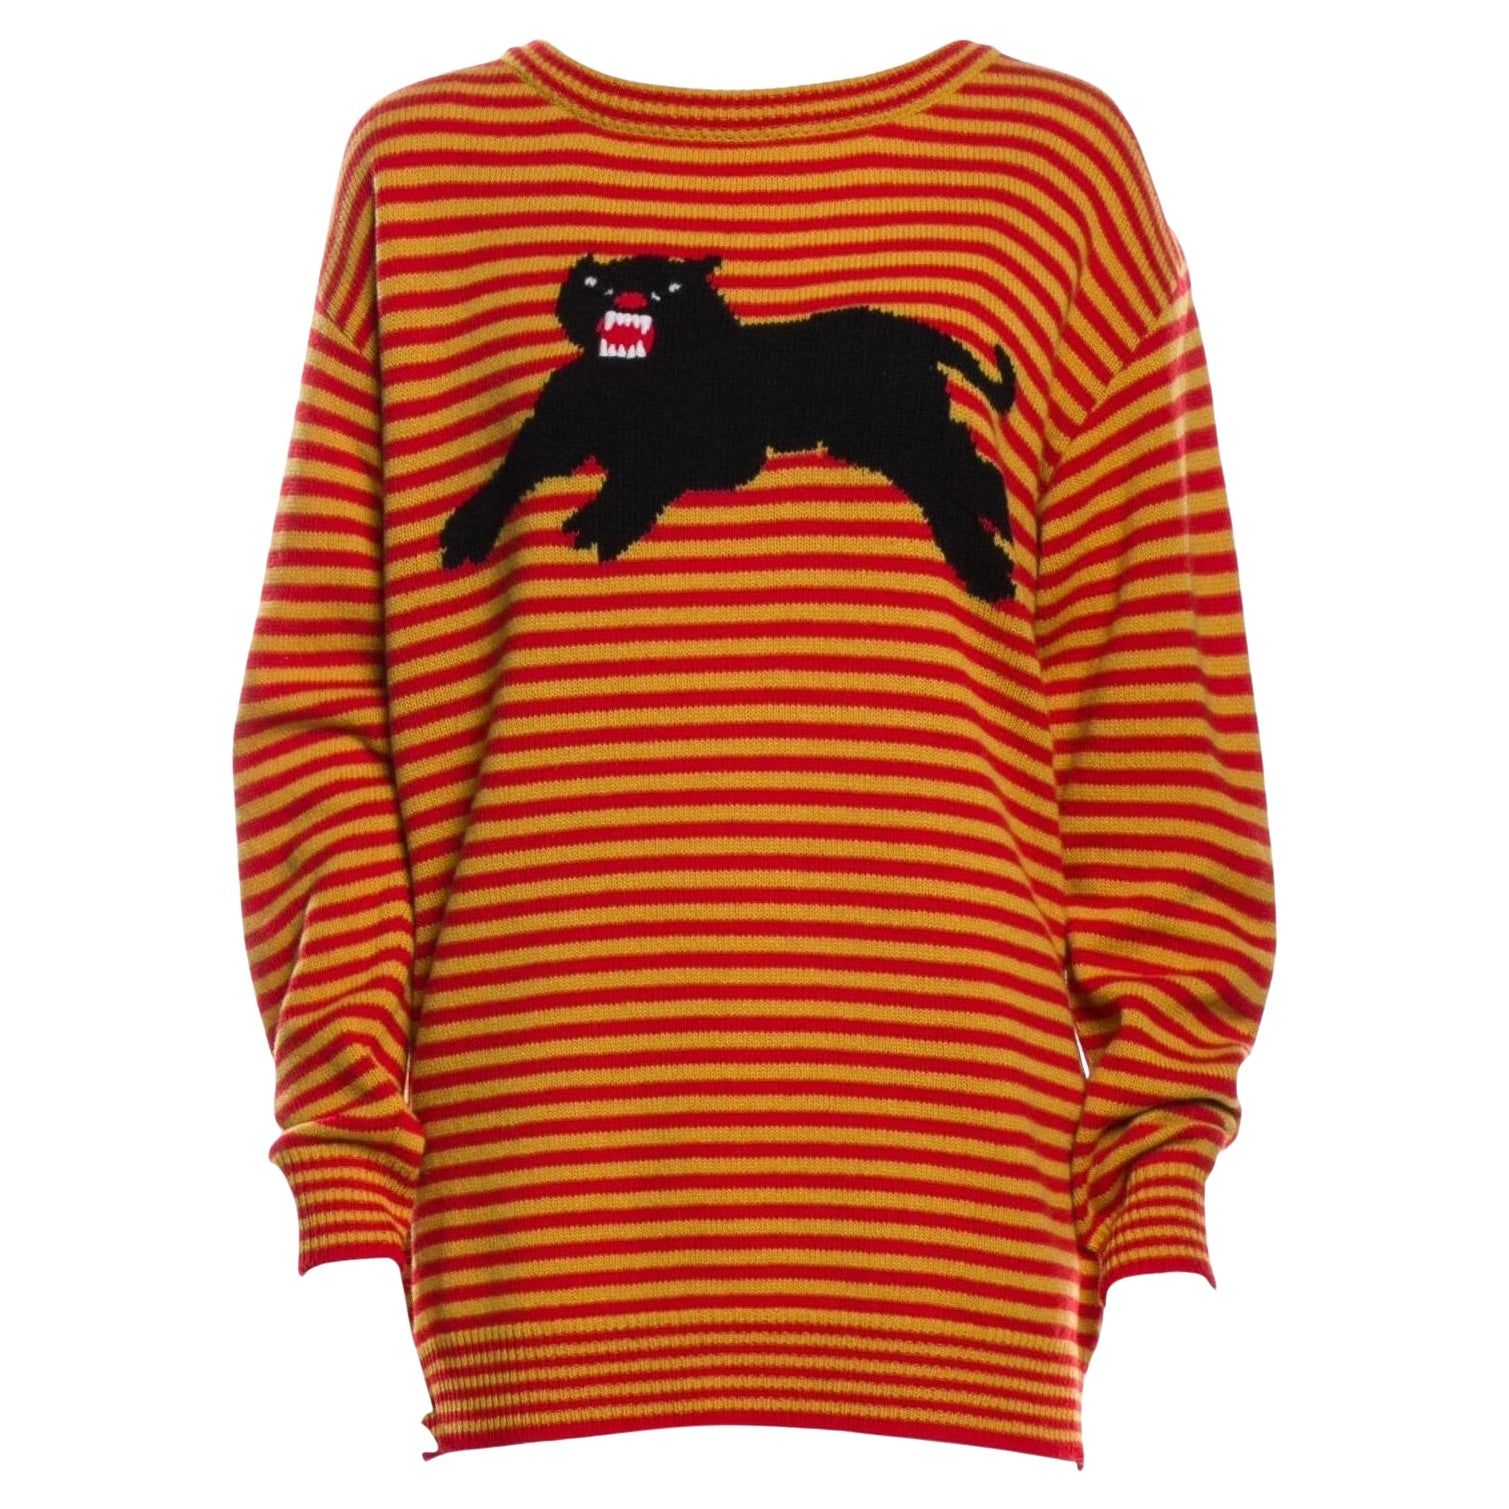 New Laura Dern Big Little Lies Gucci Panther Sweater Sz S "She Knows" episode